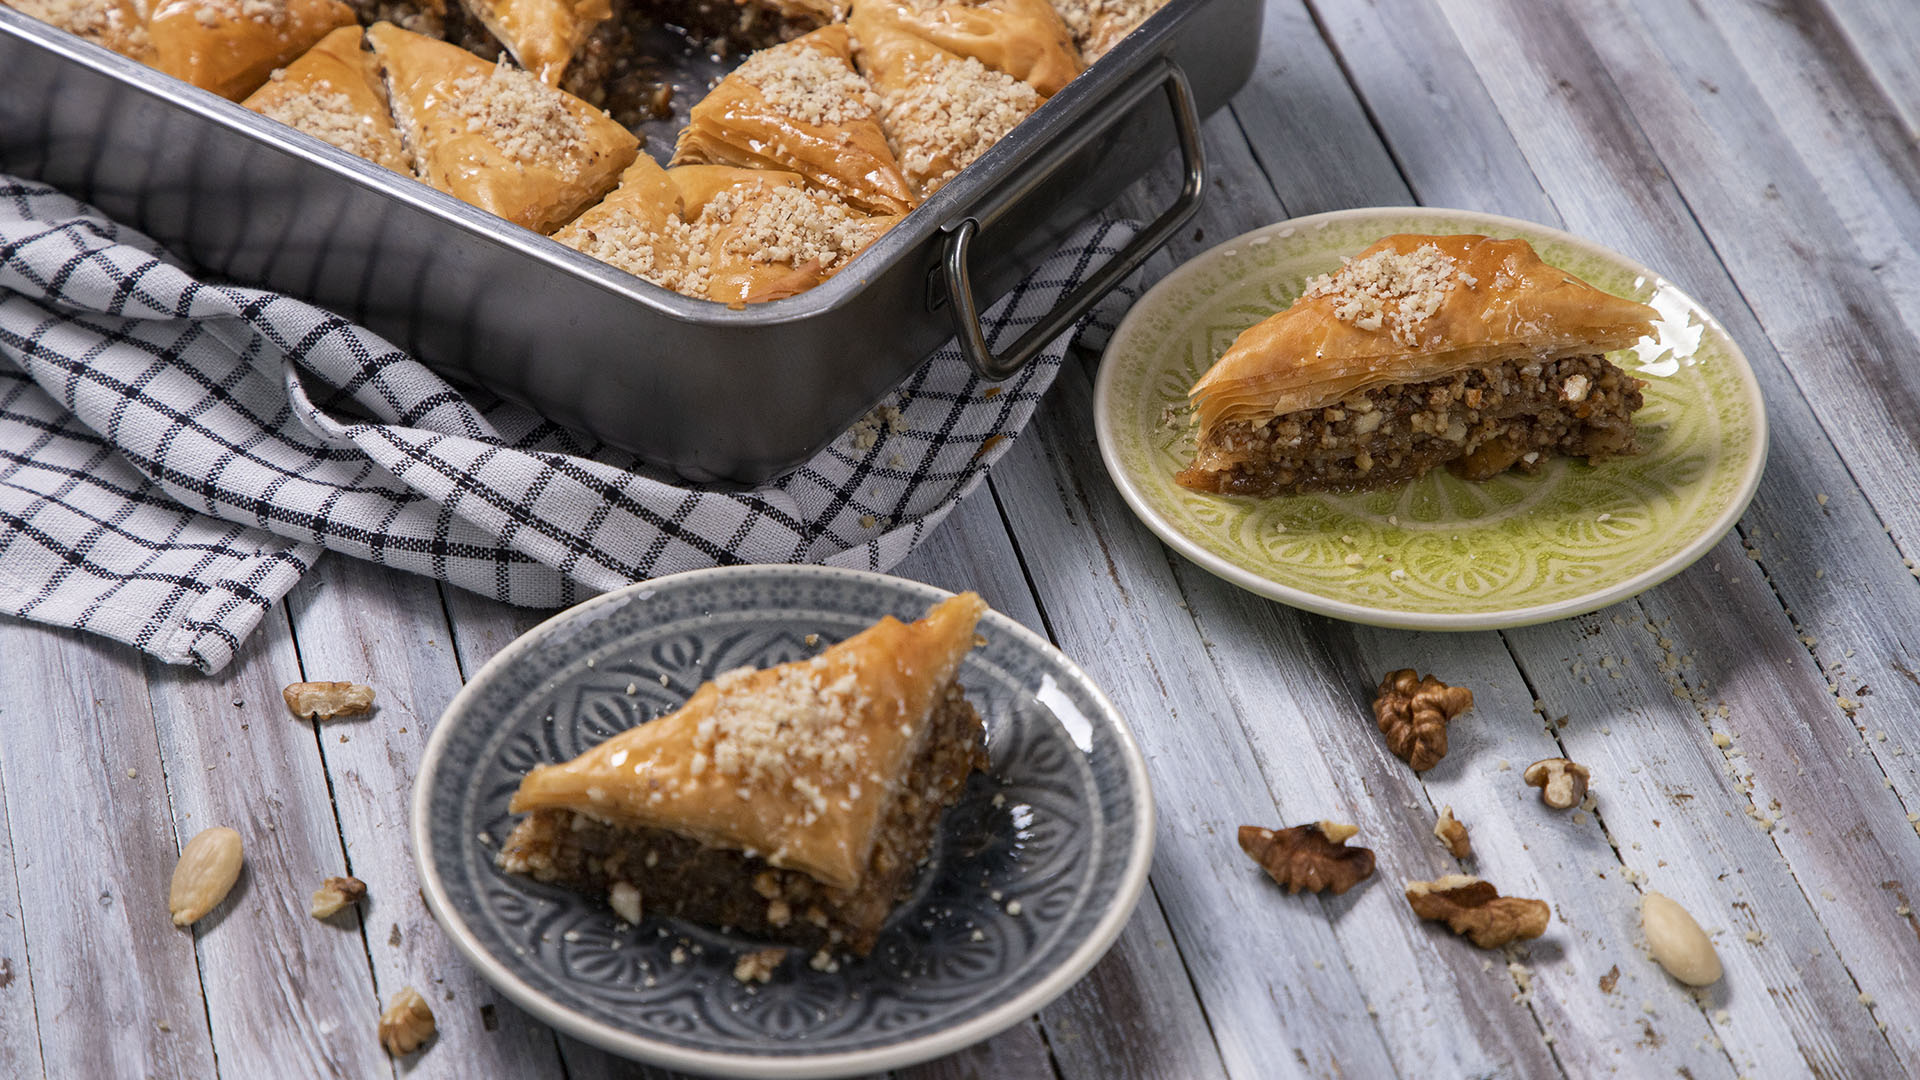 Baklava: A cultural symbol that represents Turkish culinary heritage and tradition. 1920x1080 Full HD Wallpaper.